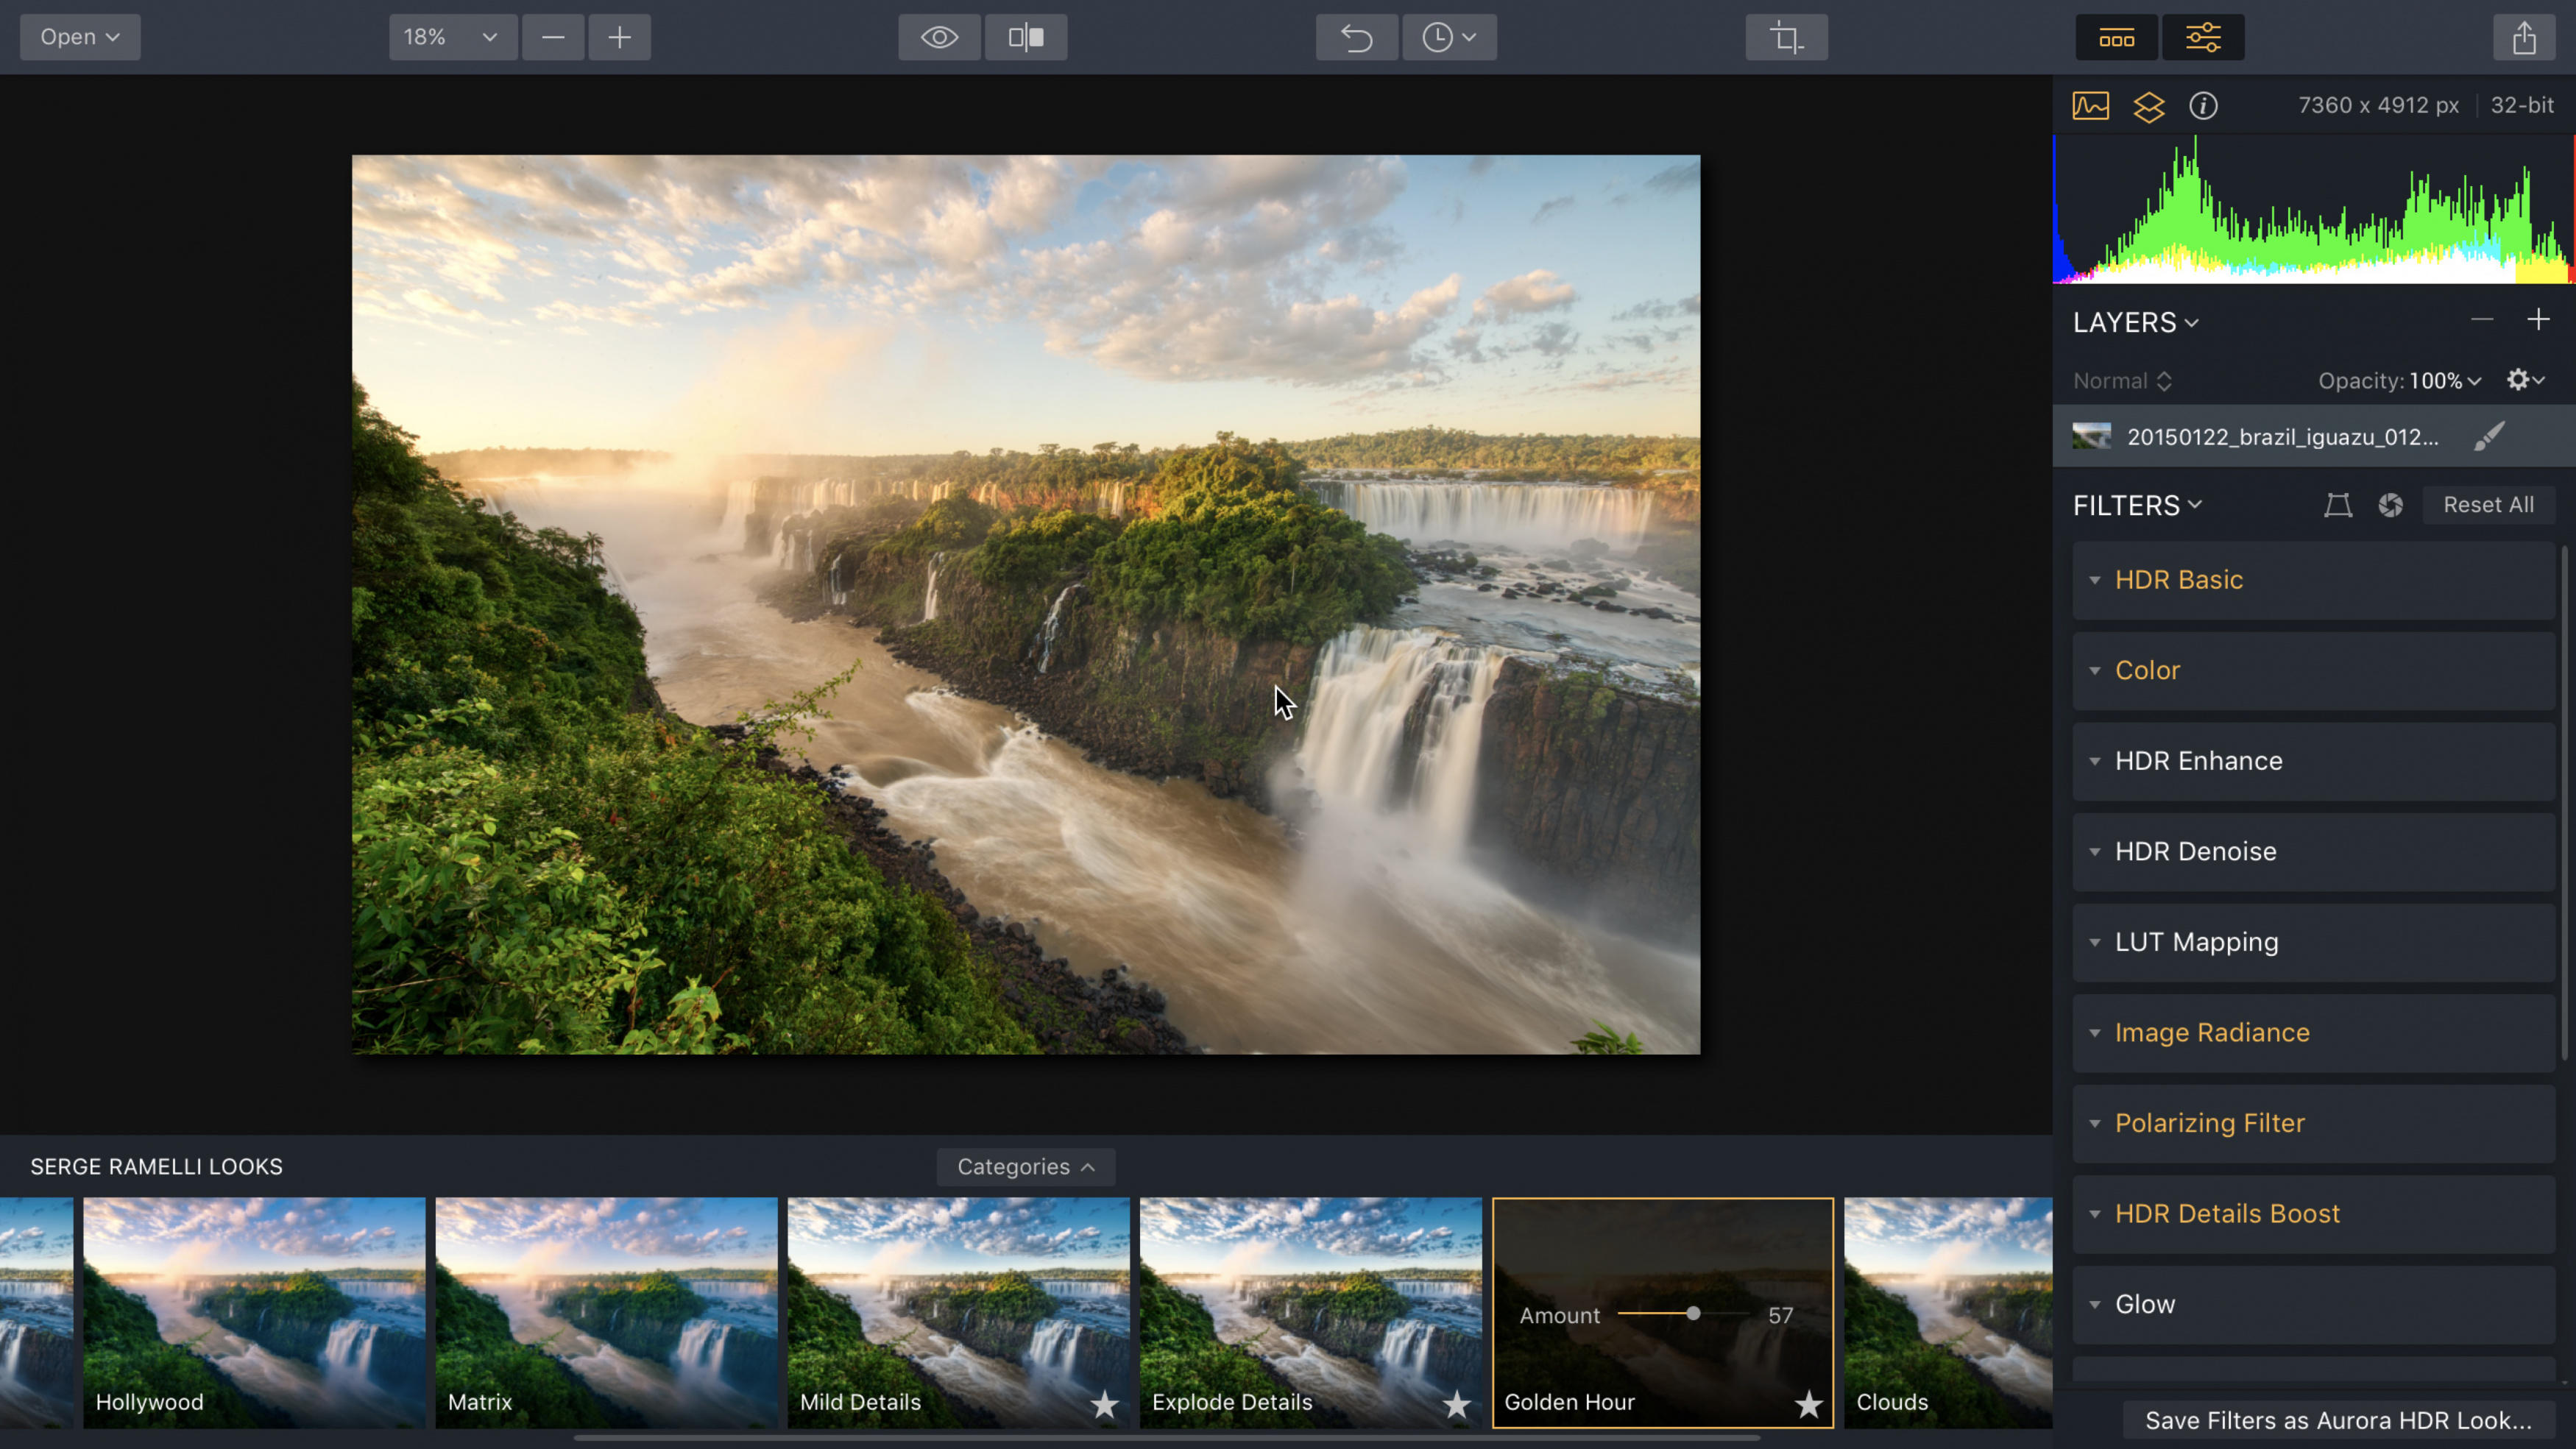 aurora hdr software opens unwanted browser at startup